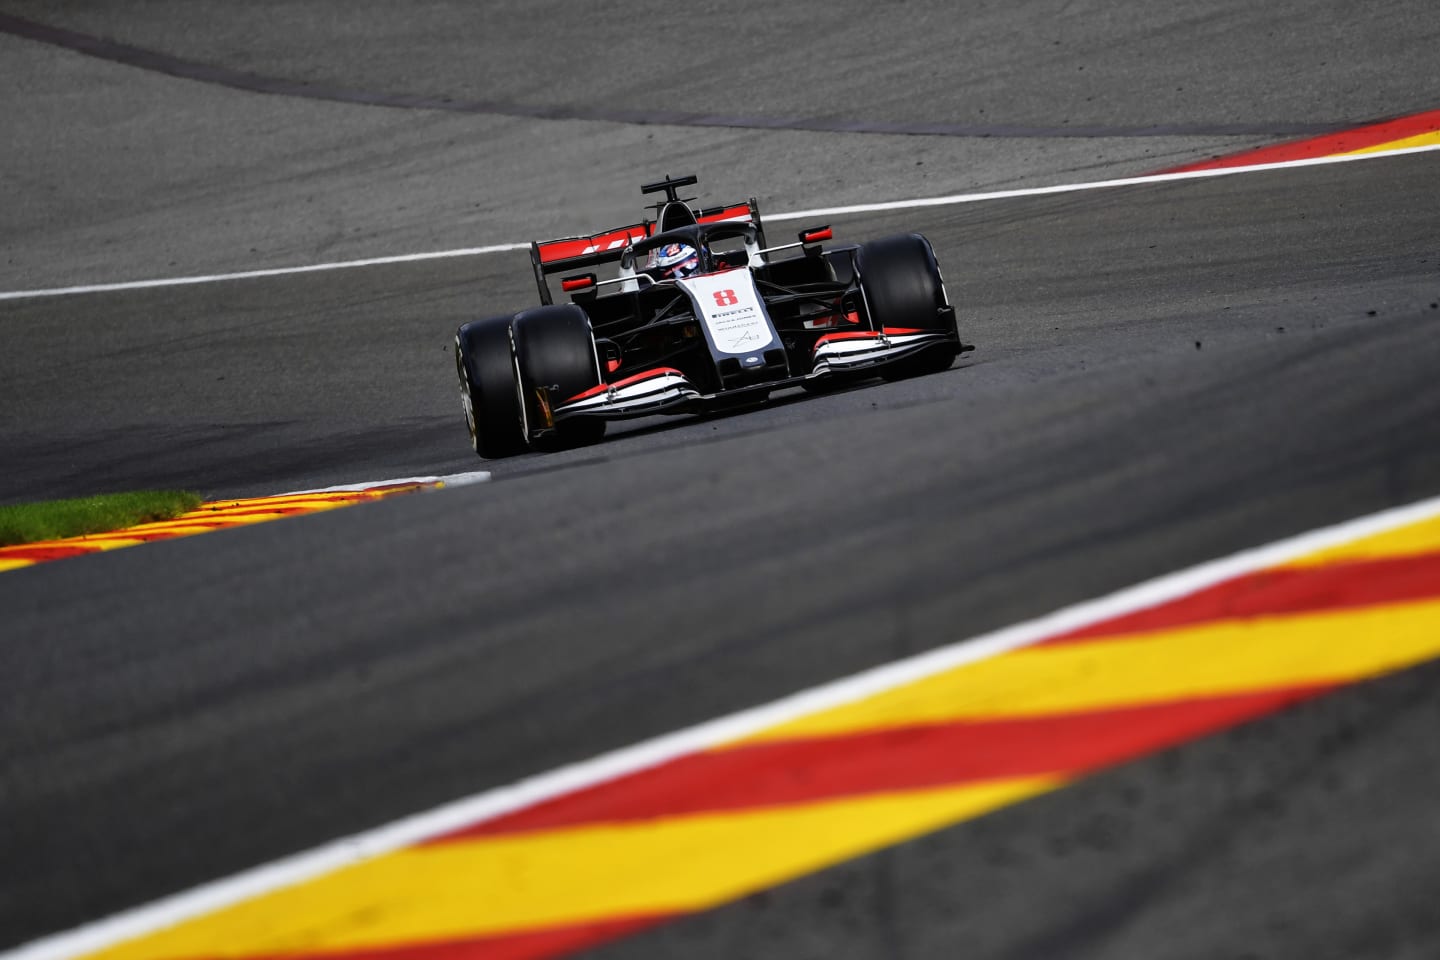 SPA, BELGIUM - AUGUST 28: Romain Grosjean of France driving the (8) Haas F1 Team VF-20 Ferrari on track during practice for the F1 Grand Prix of Belgium at Circuit de Spa-Francorchamps on August 28, 2020 in Spa, Belgium. (Photo by John Thuys/Pool via Getty Images)